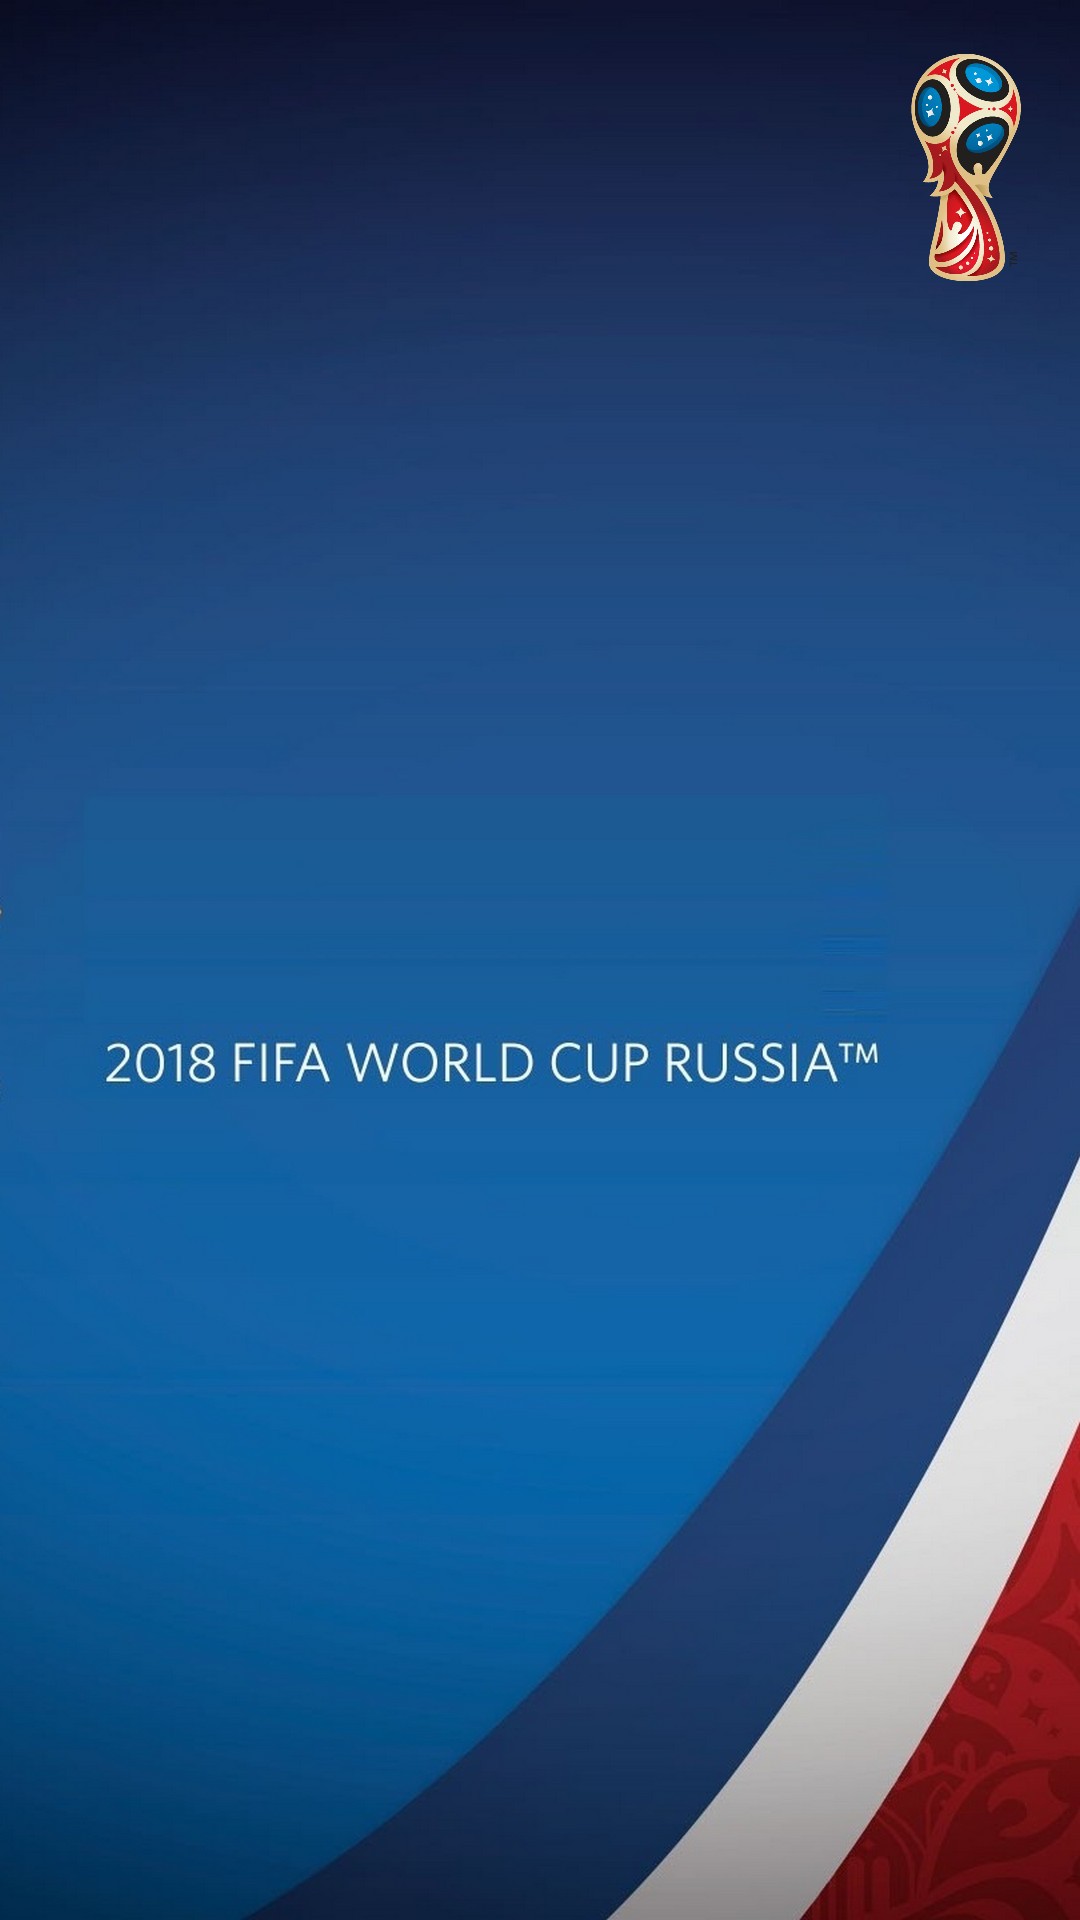 2018 World Cup HD Wallpaper For iPhone With Resolution 1080X1920 pixel. You can make this wallpaper for your Mac or Windows Desktop Background, iPhone, Android or Tablet and another Smartphone device for free